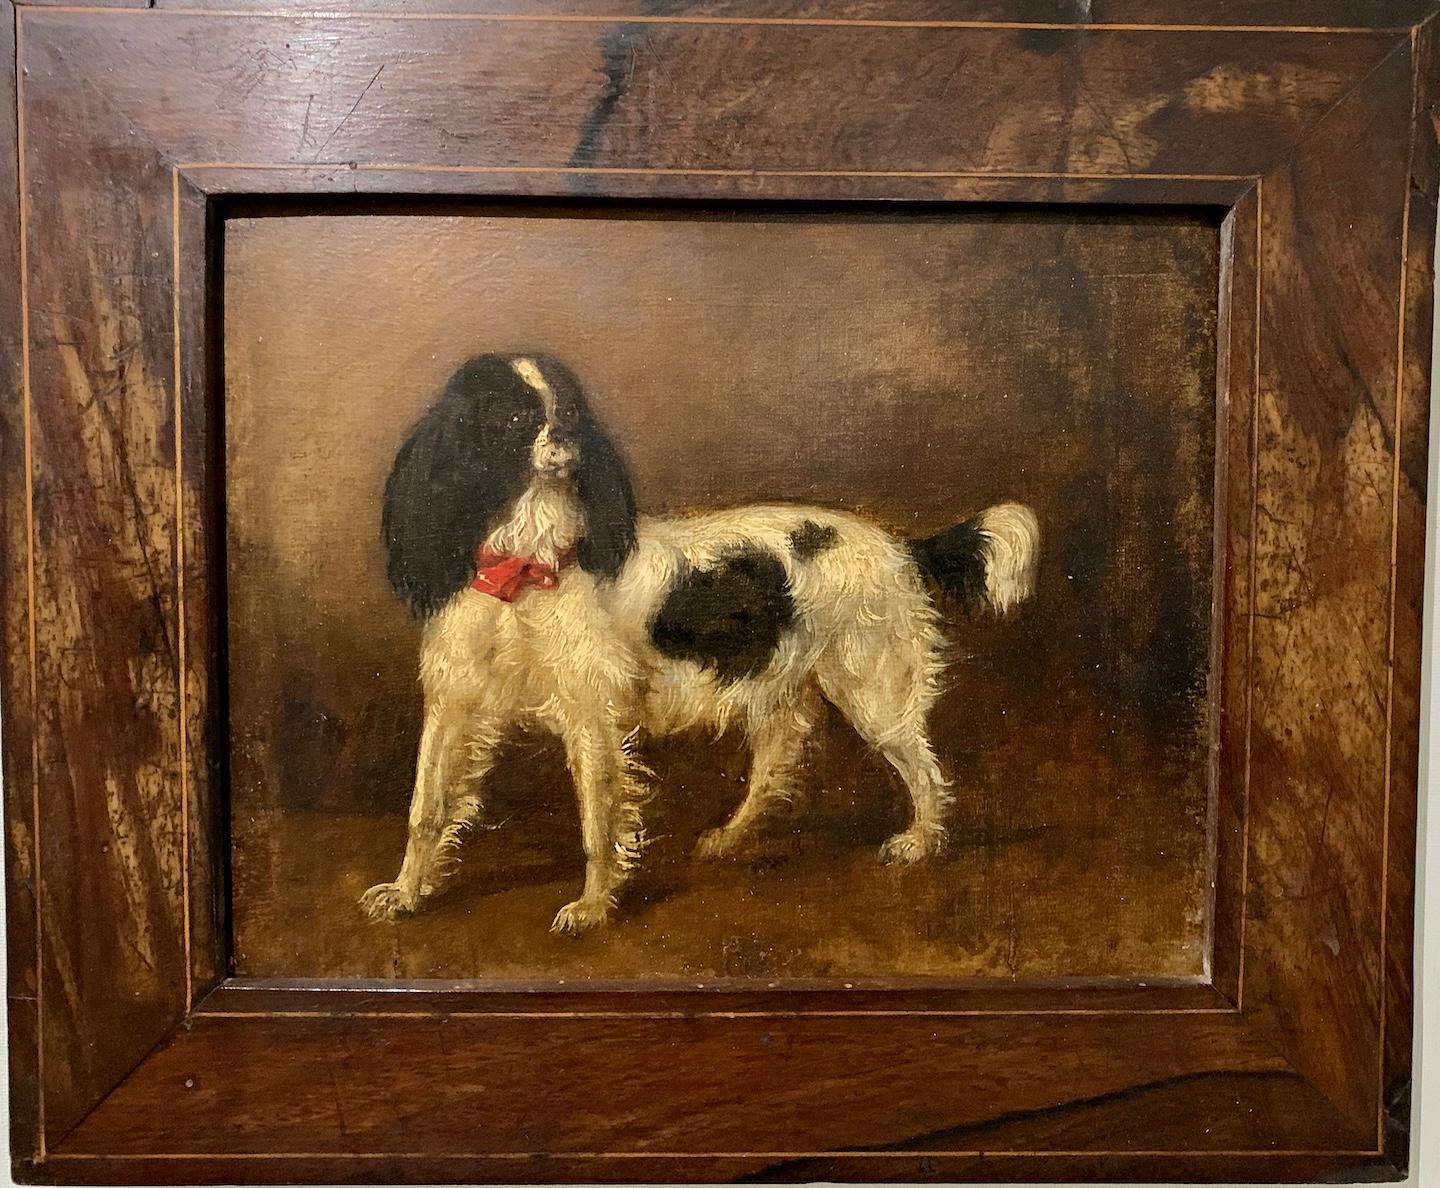 Early 19th century Antique Portrait of a King Charles Cavalier Spaniel dog  - Old Masters Painting by 19th Century English School